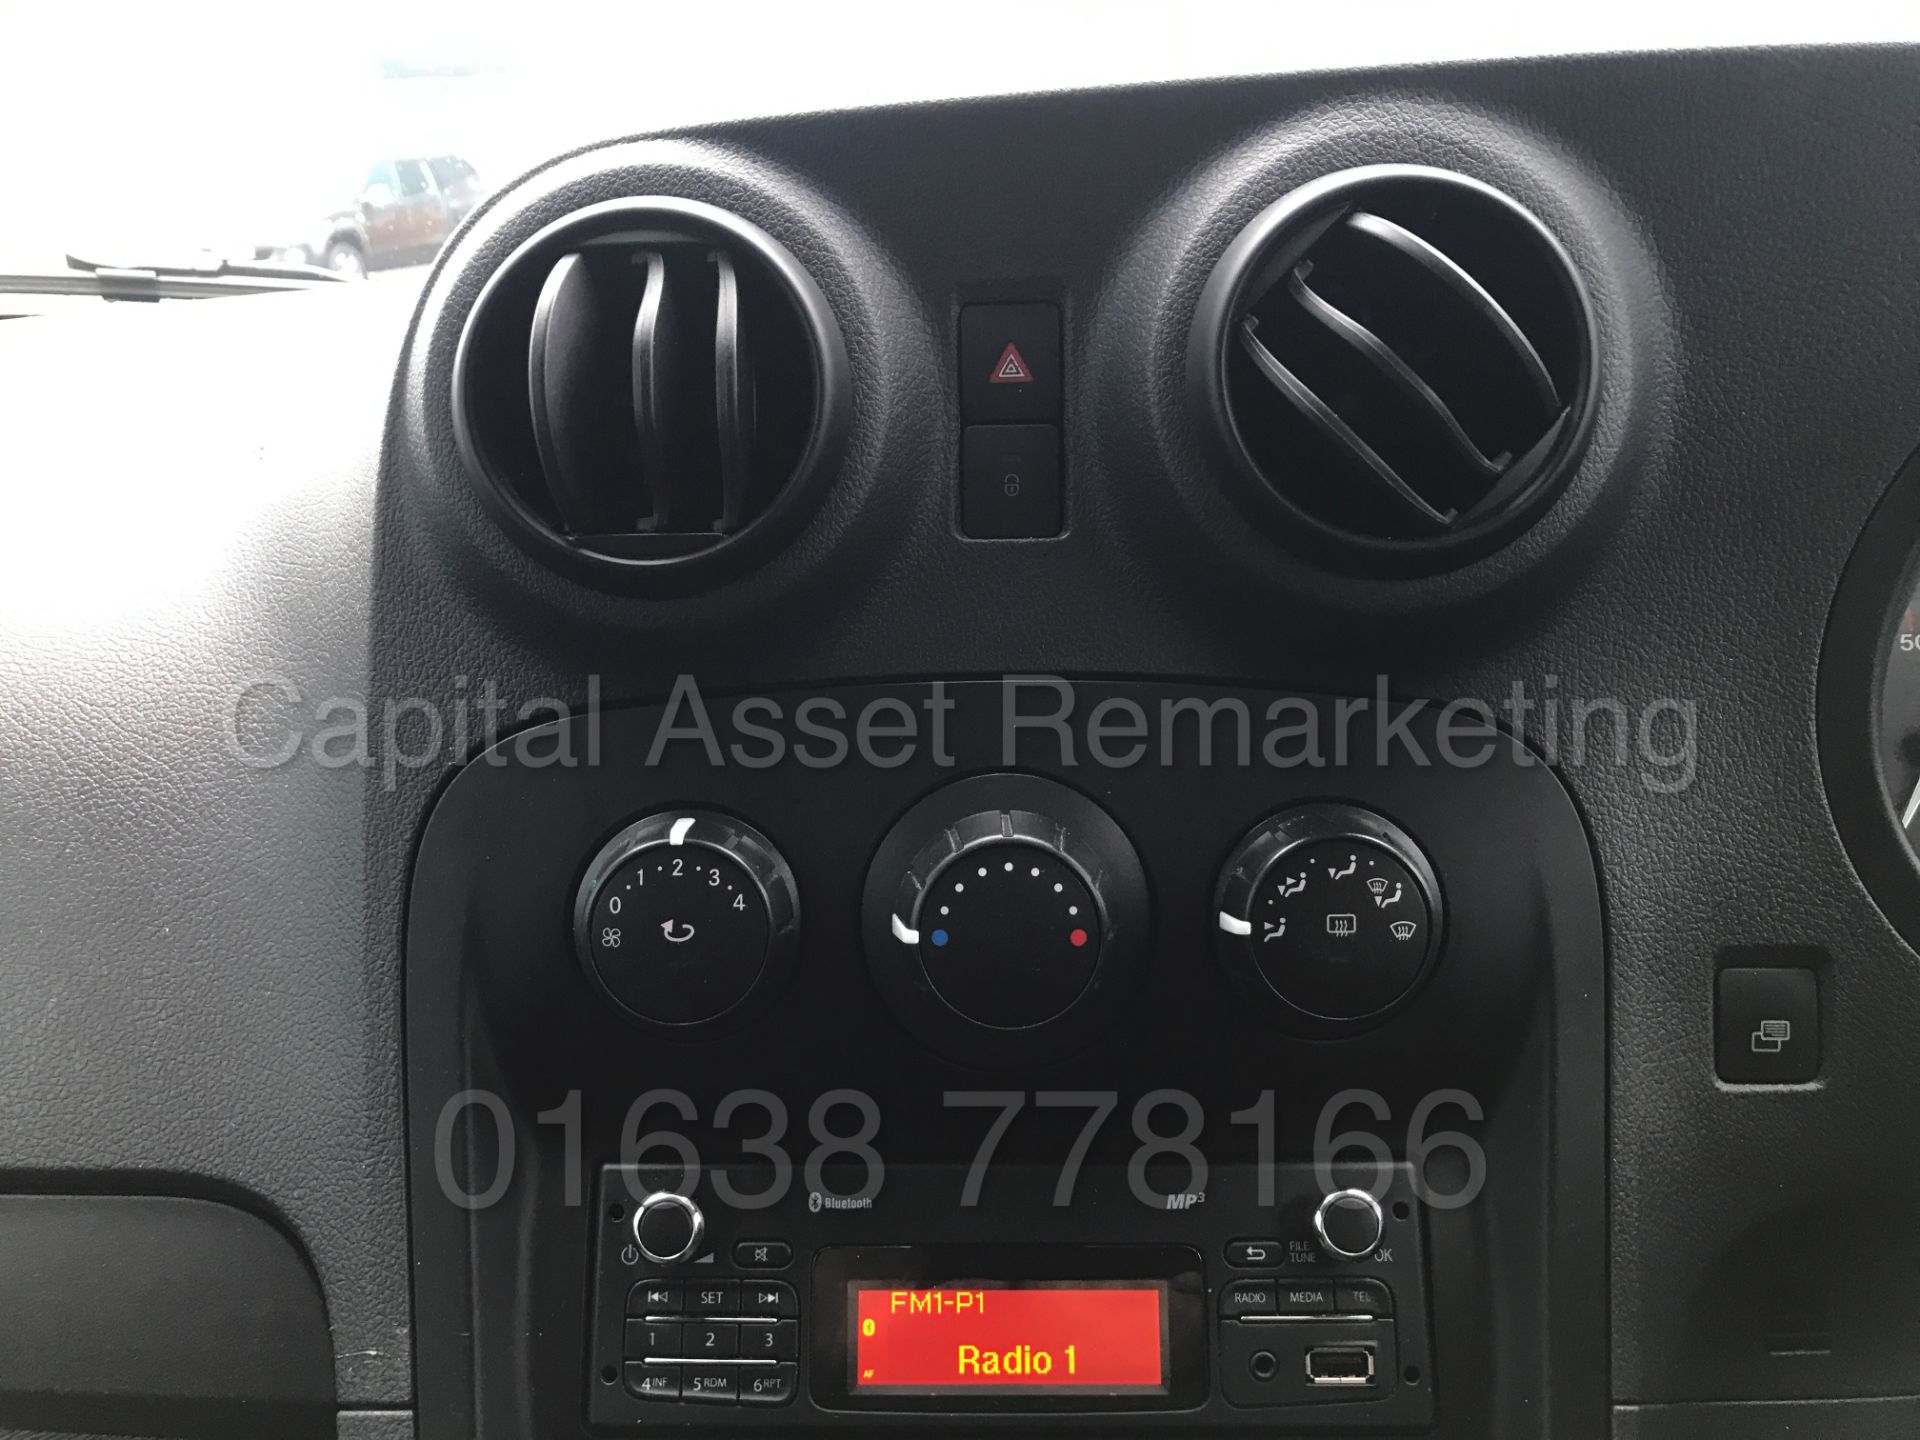 MERCEDES-BENZ CITAN 109 CDI LWB (2015 MODEL) '1.5 CDI - 90 BHP' (1 COMPANY OWNER FROM NEW) - Image 21 of 25